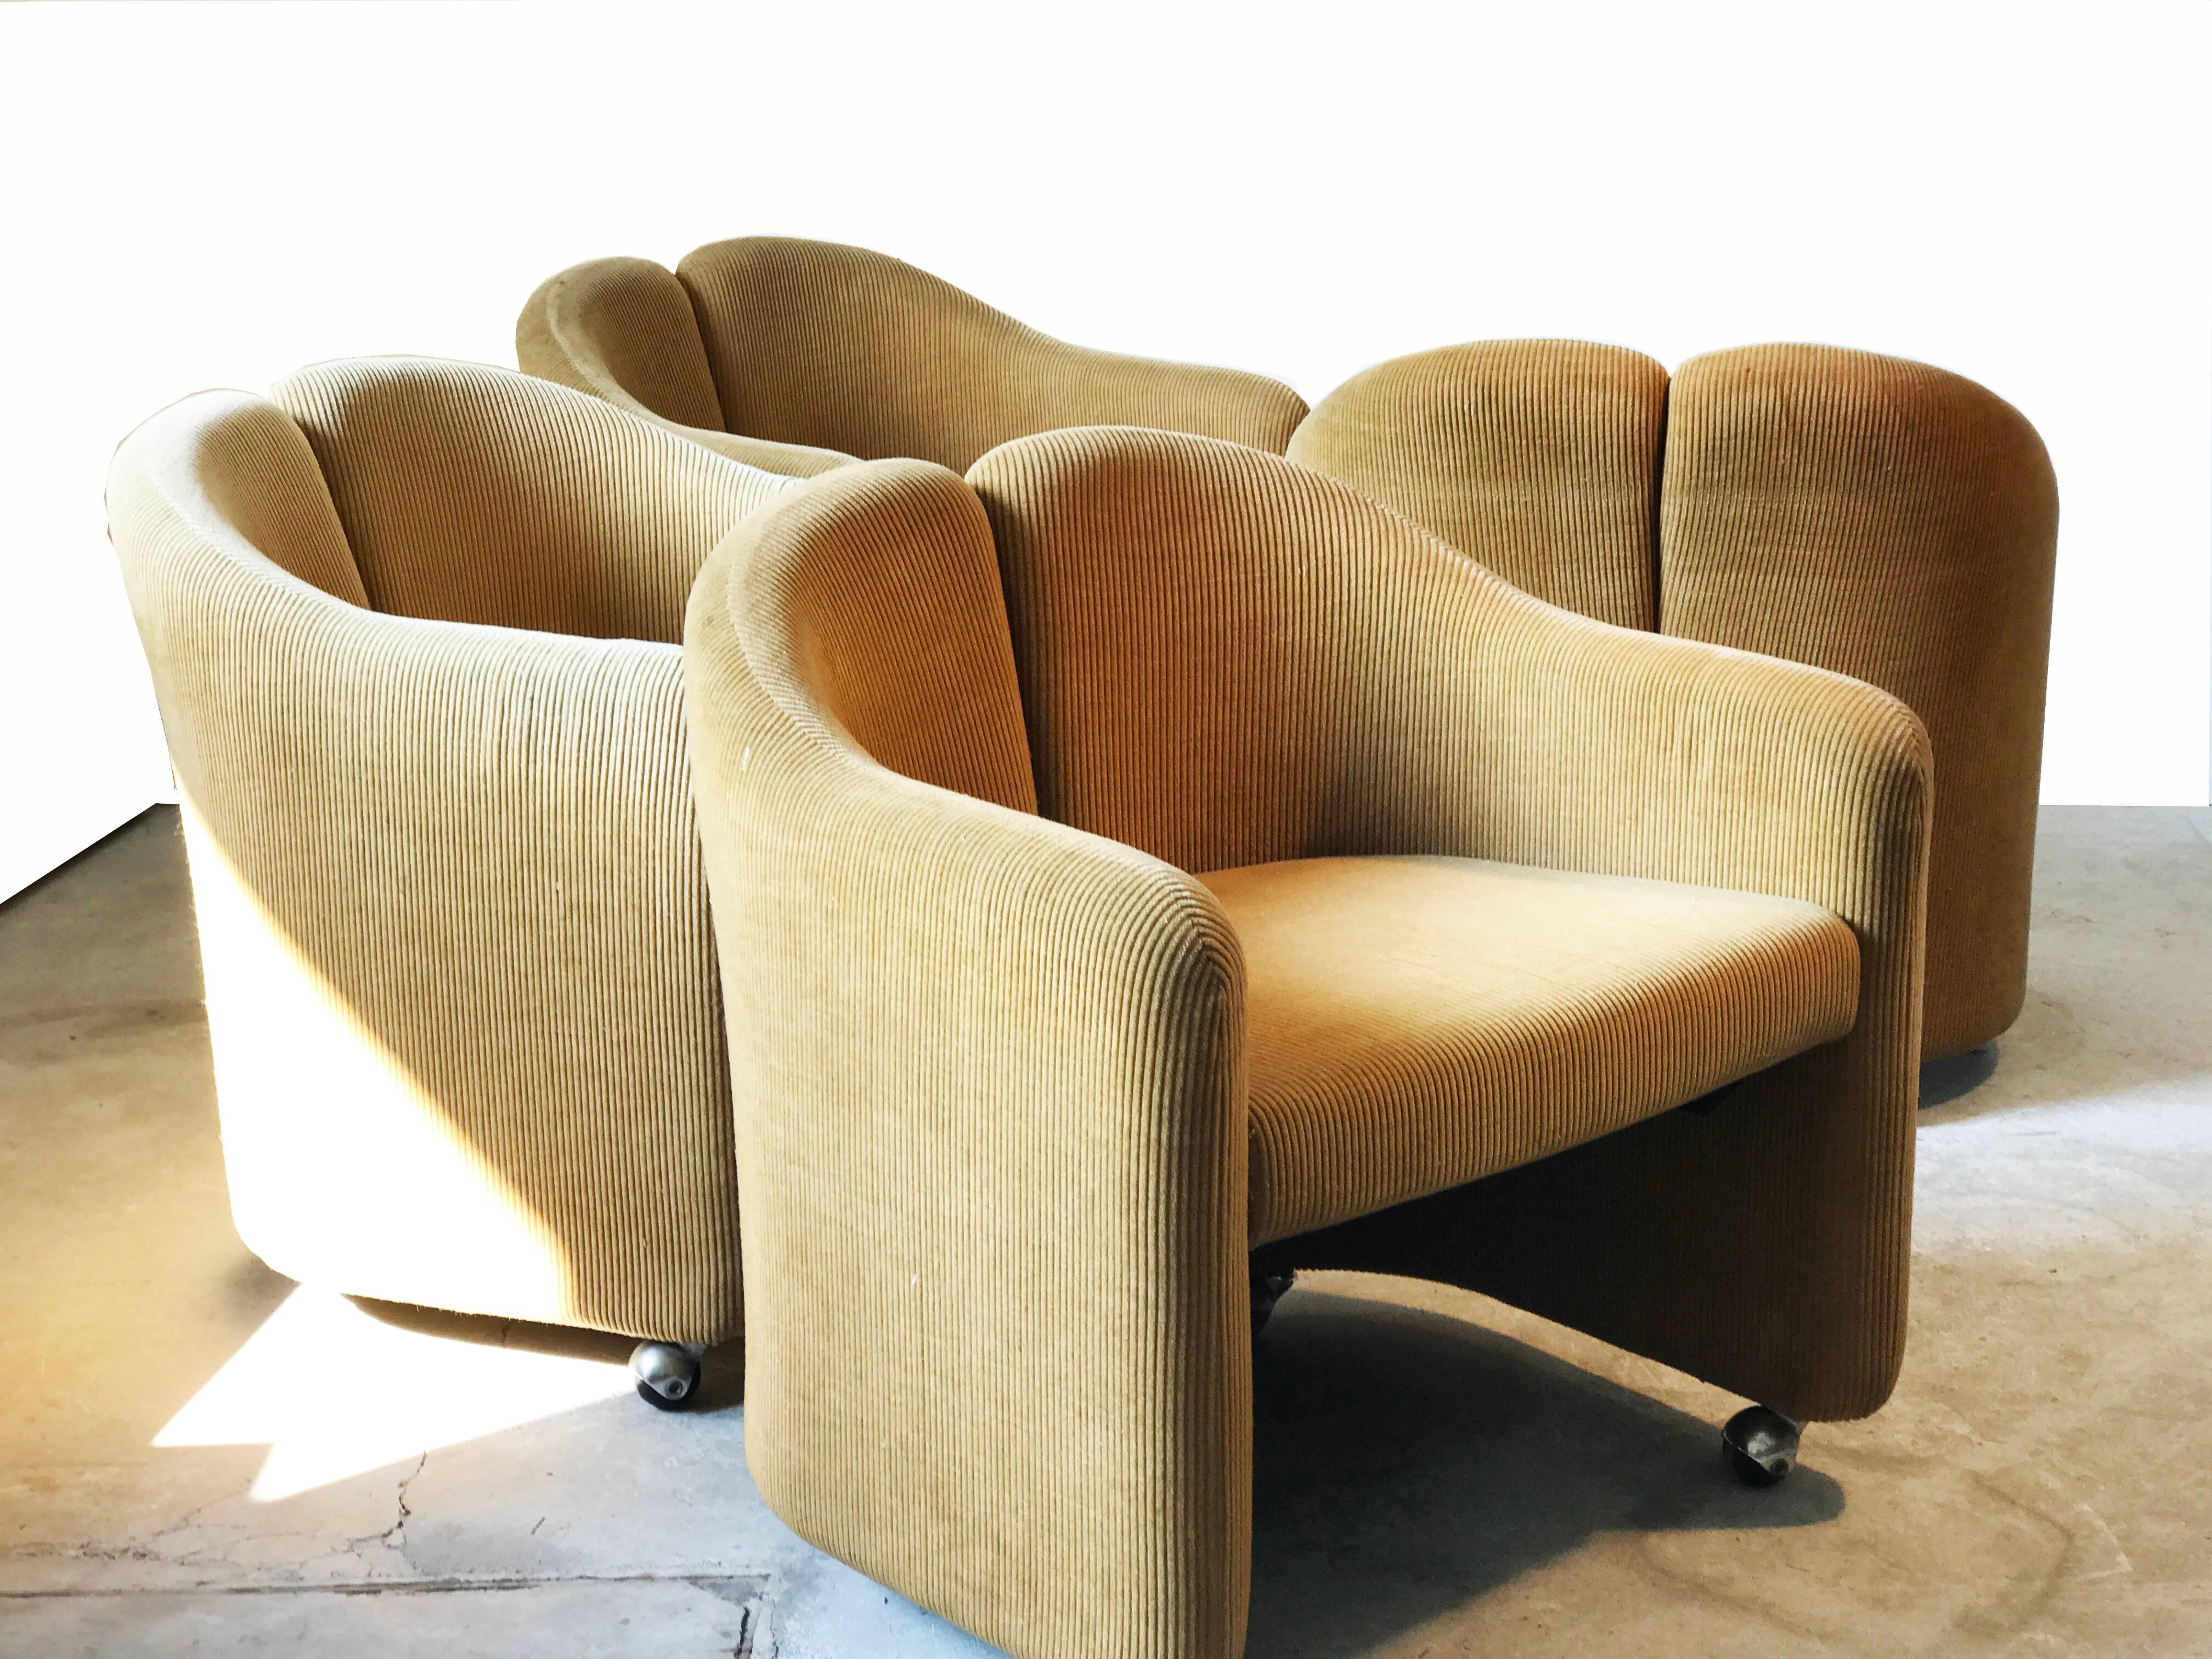 PS 142 is the lower one of the series designed by Eugenio Gerli in 1960s, it has a metal structure and is fully upholstered in short of synthetic corduroy in gold yellow fabric covered polyurethane foam, and fitted with wheels.
Fabric and foam are